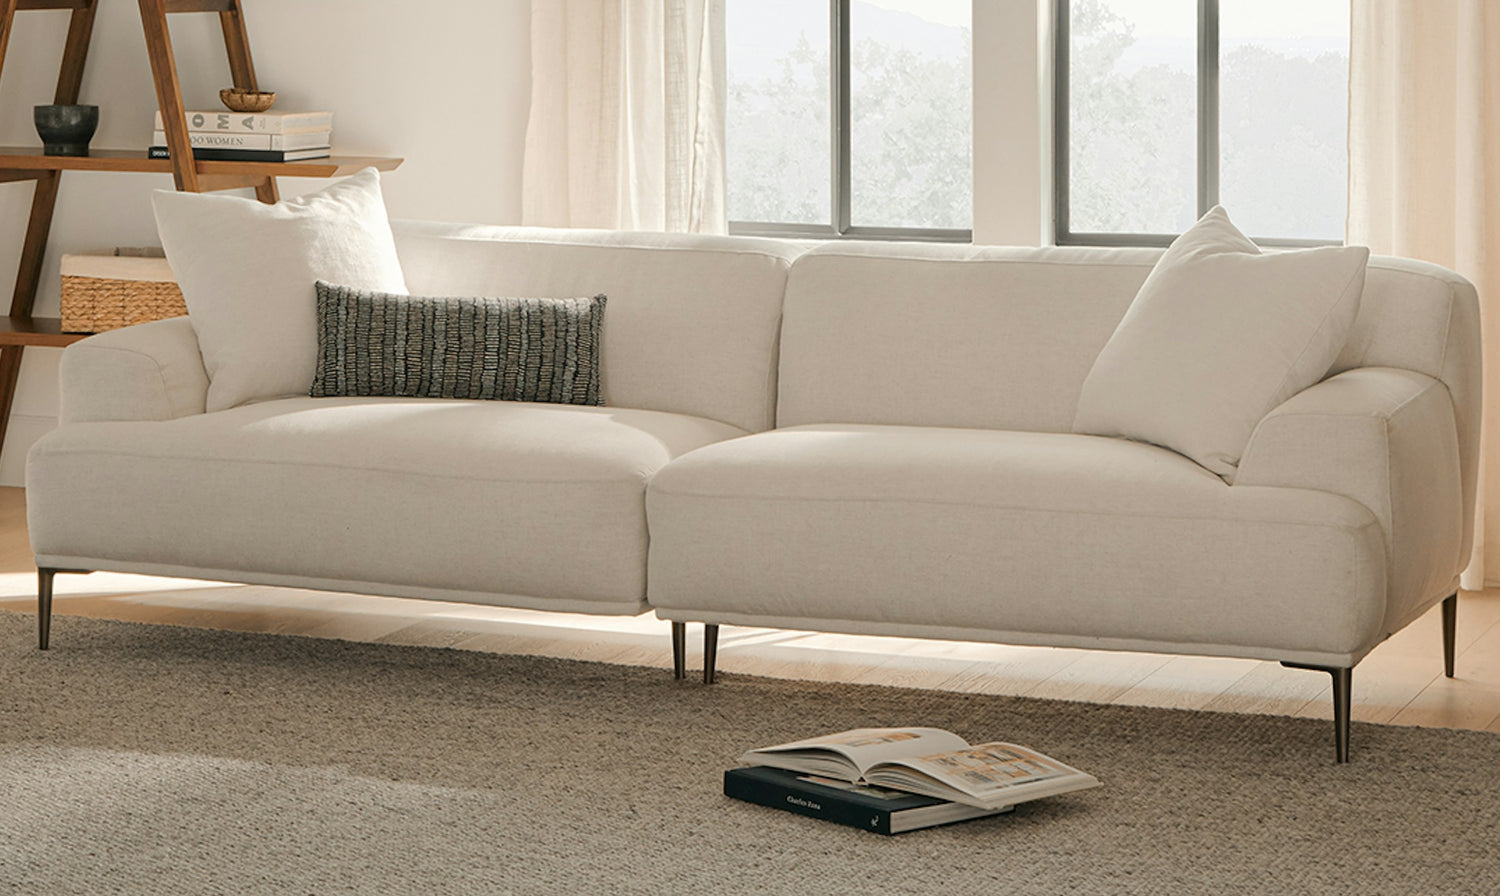 A modern living room with a white sofa adorned with pillows, situated on a neutral-toned rug. A book lies open on the floor in front of the sofa. Light filters in through large windows in the background, highlighting a corner shelf with decorative items on the left.